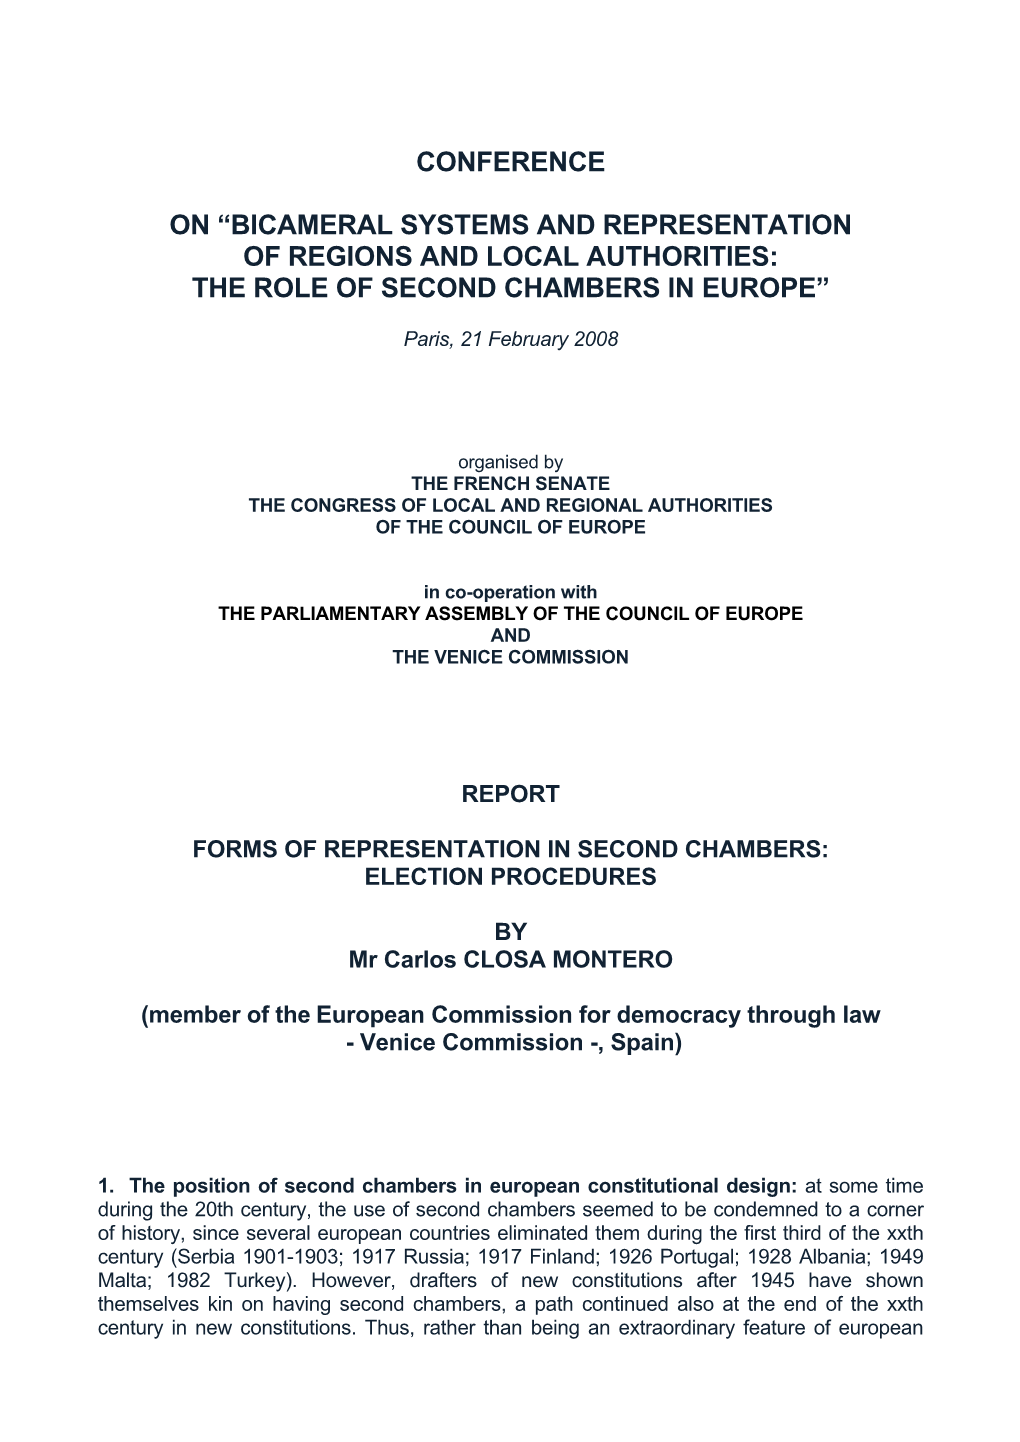 Bicameral Systems and Representation of Regions and Local Authorities: the Role of Second Chambers in Europe”